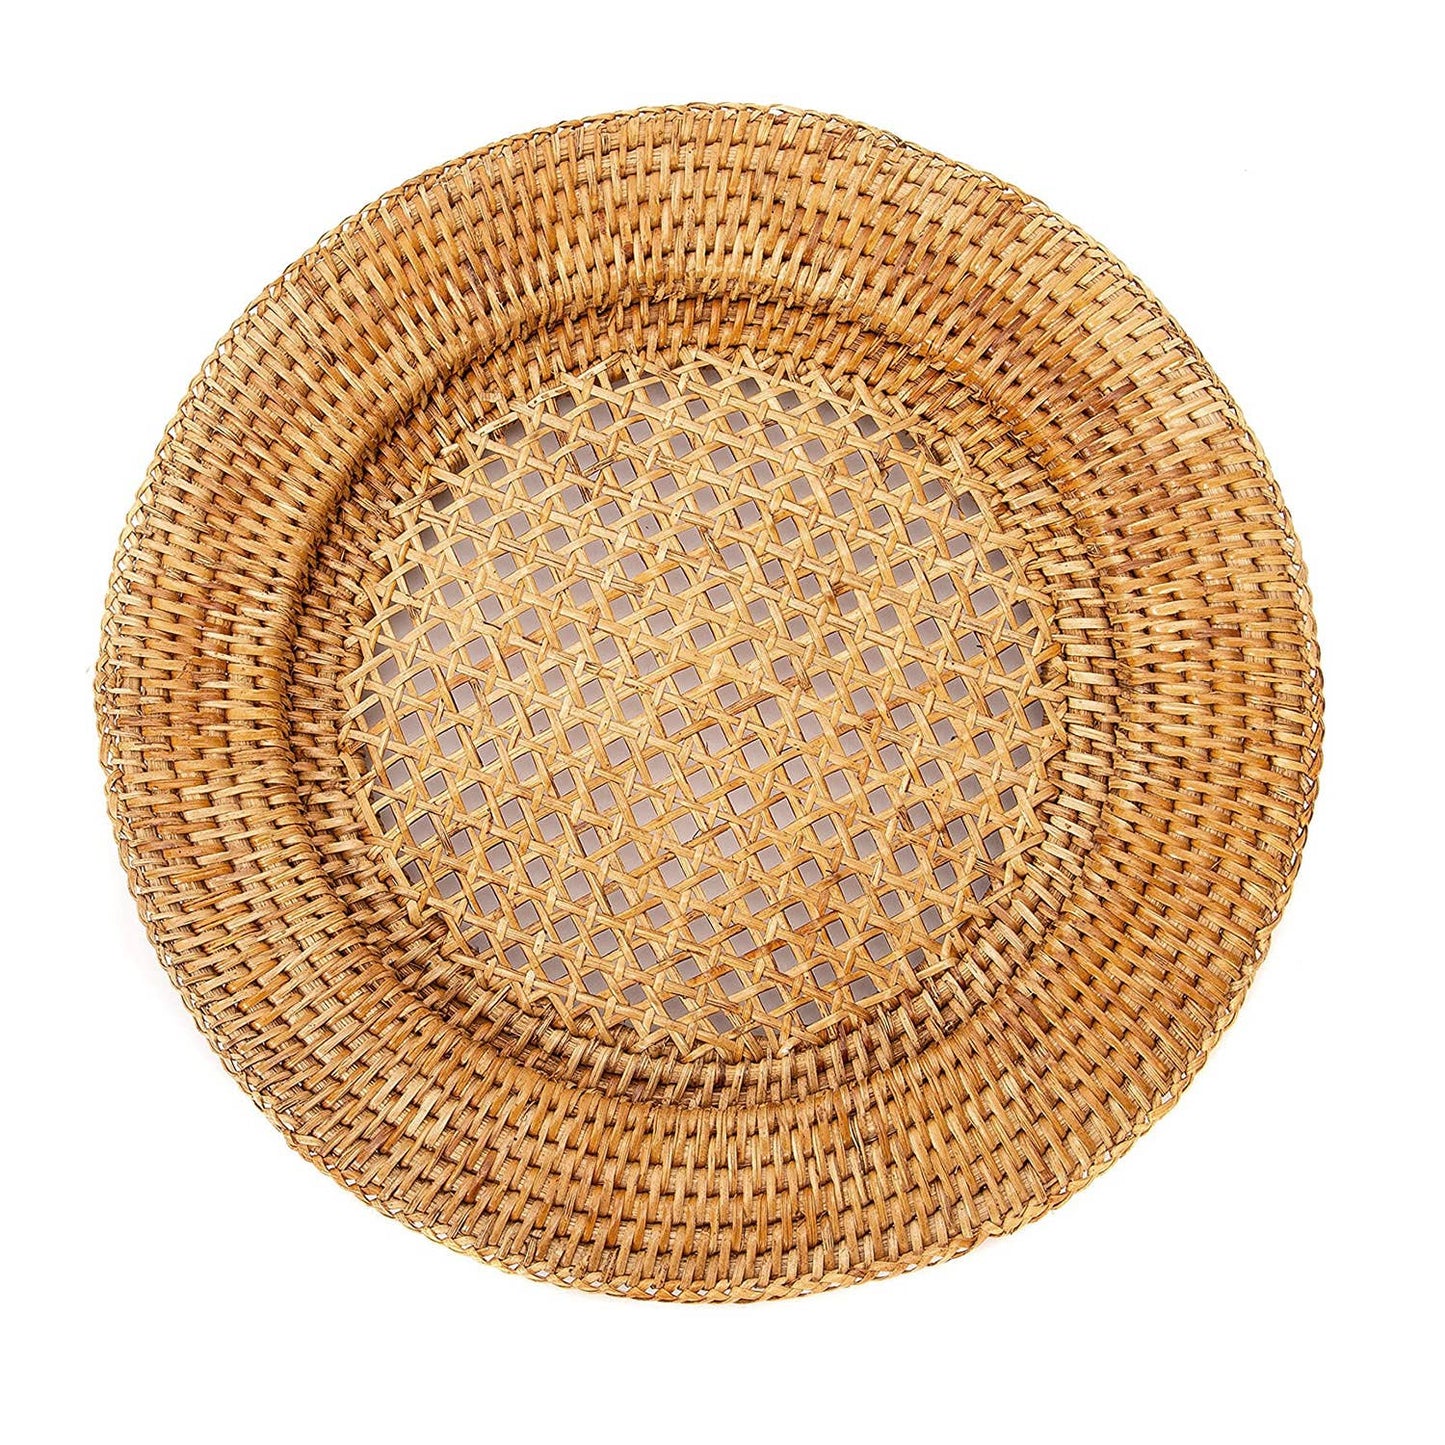 Rattan Charger Woven Wicker Plate